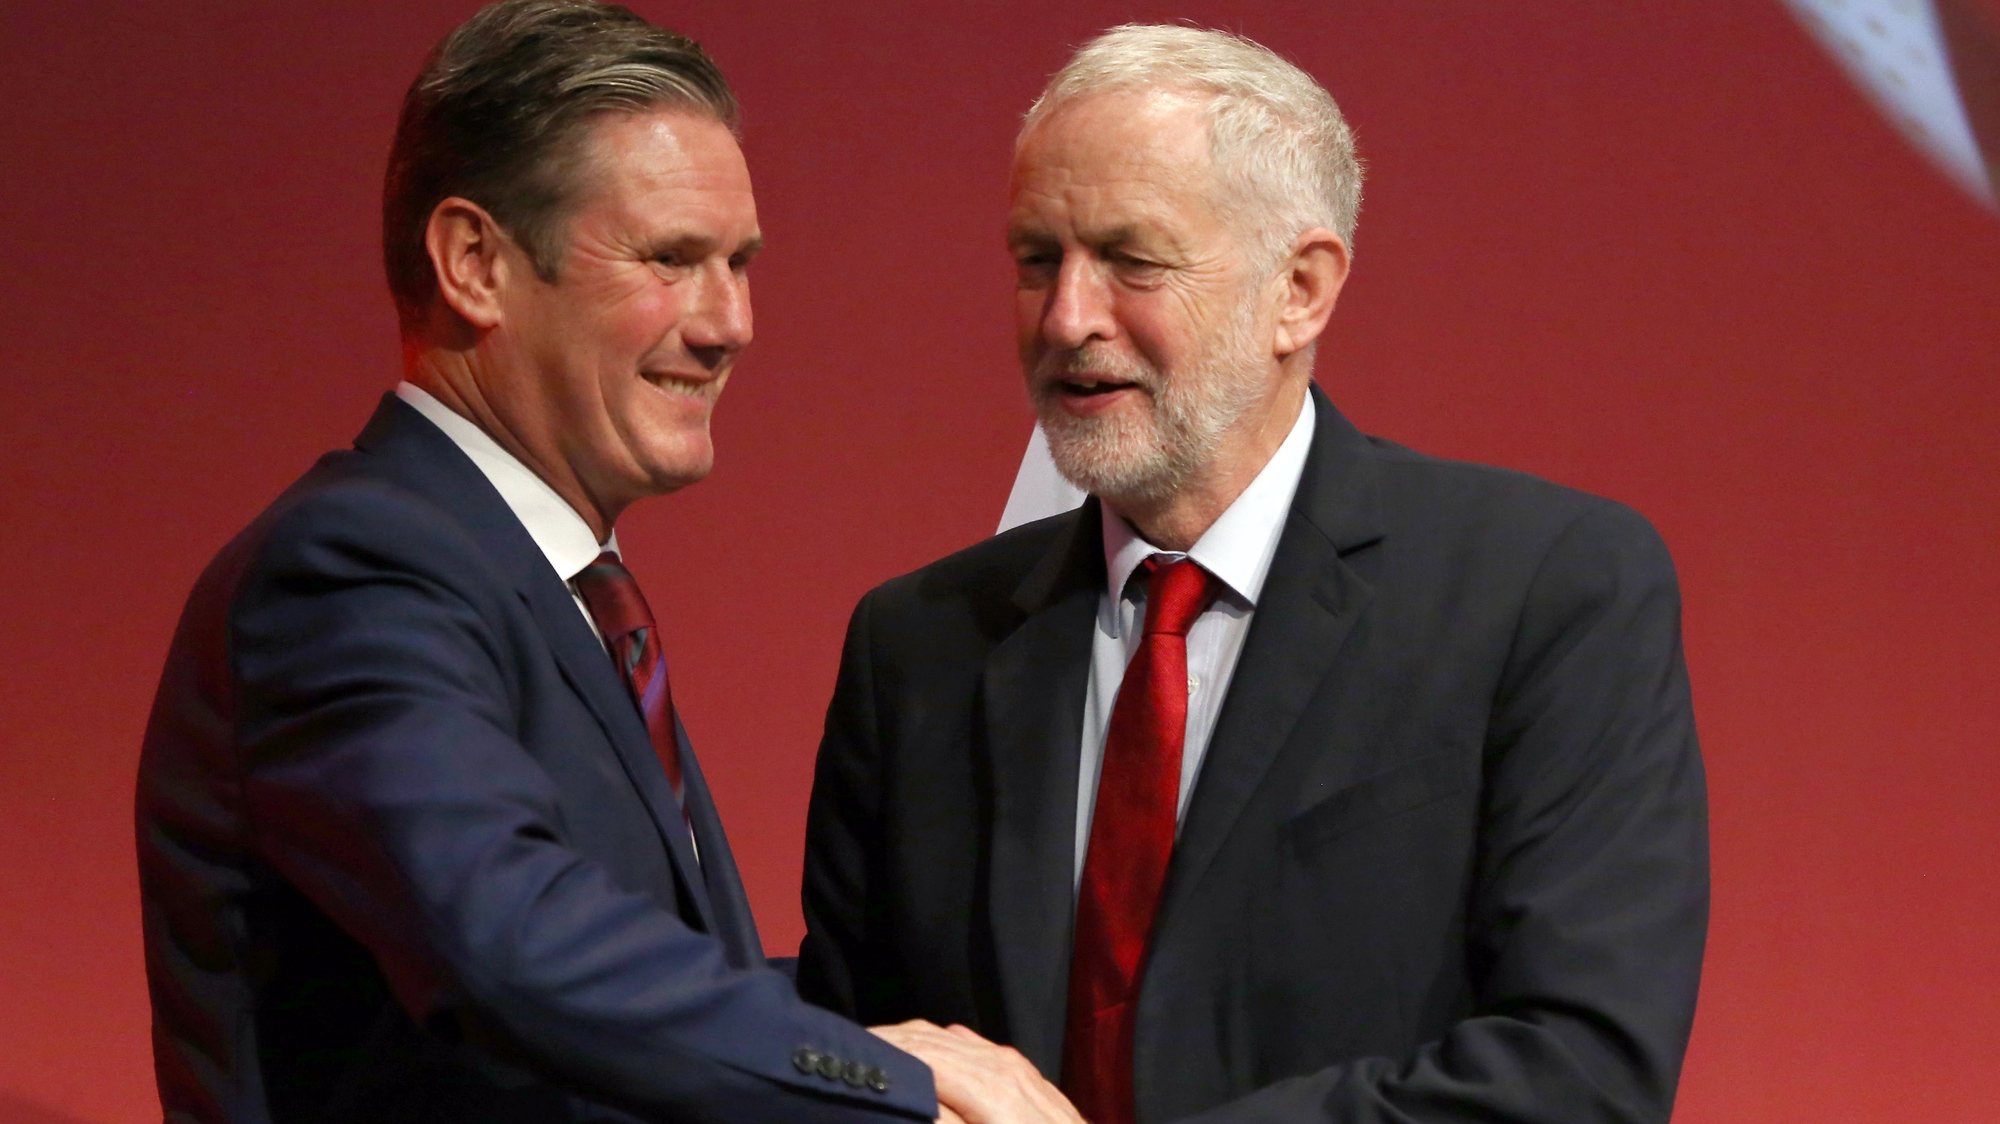 epa08342489 (FILE) - Britain&#039;s opposition Labour Party then Spokesperson for Exiting the EU, Keir Starmer (L) is congratulated following his speech by then party leader Jeremy Corbyn (R) at the Labour Party Conference in Brighton, Britain, 25 September 2017 (reissued 04 April 2020). Keir Starmer was announced elected succesor to Labour Party leader Jeremy Corbyn on 04 April 2020 in a ballot of party members, trade unionists and other supporters.  EPA/NEIL HALL *** Local Caption *** 53790919